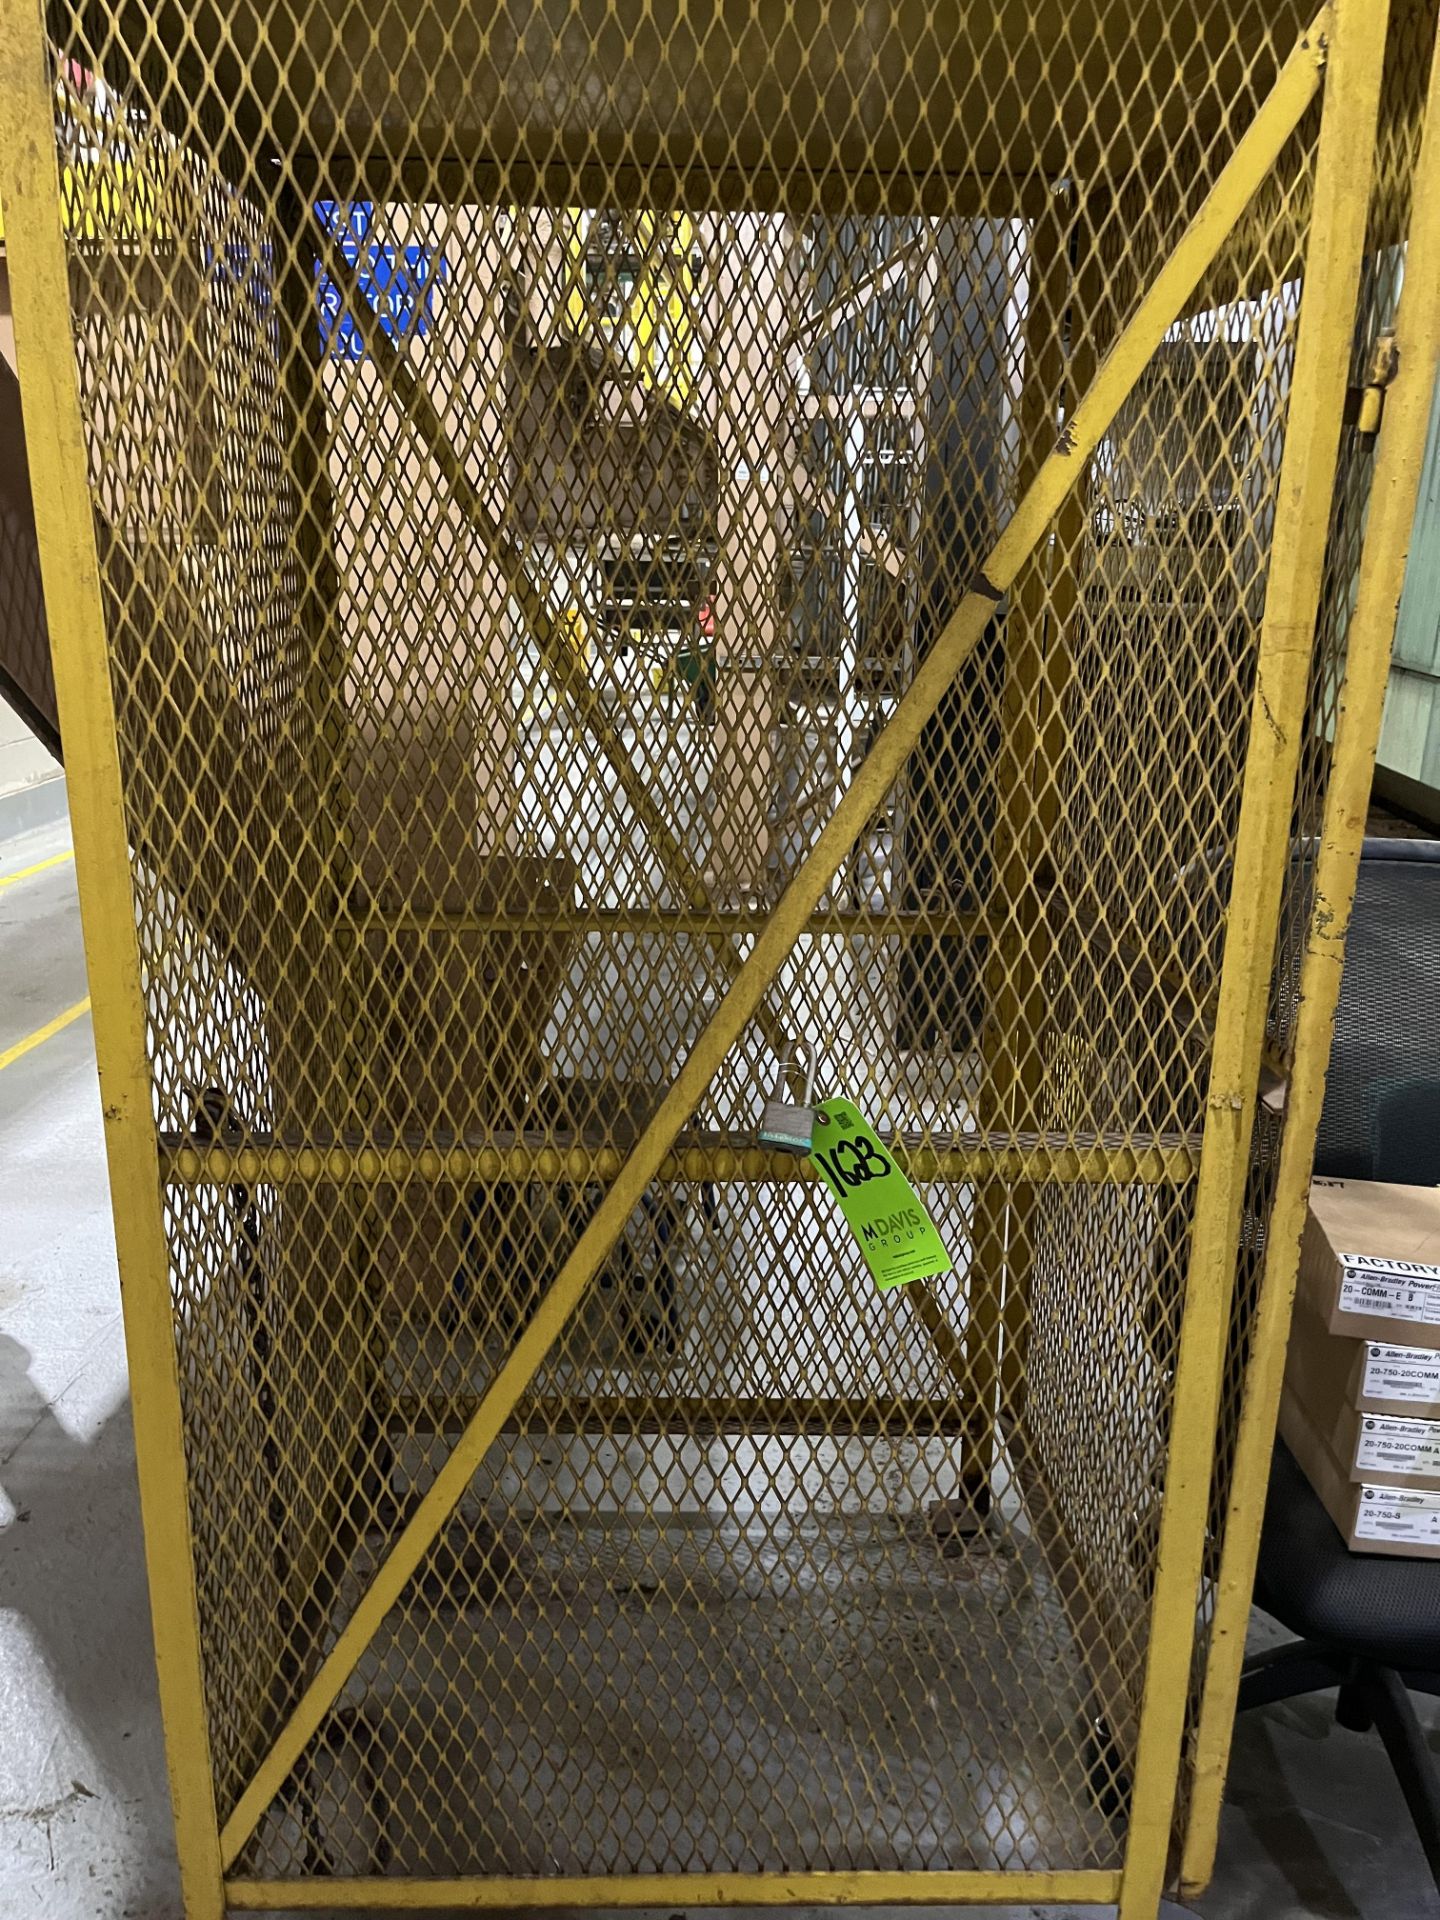 SAFETY CAGE - Image 2 of 2